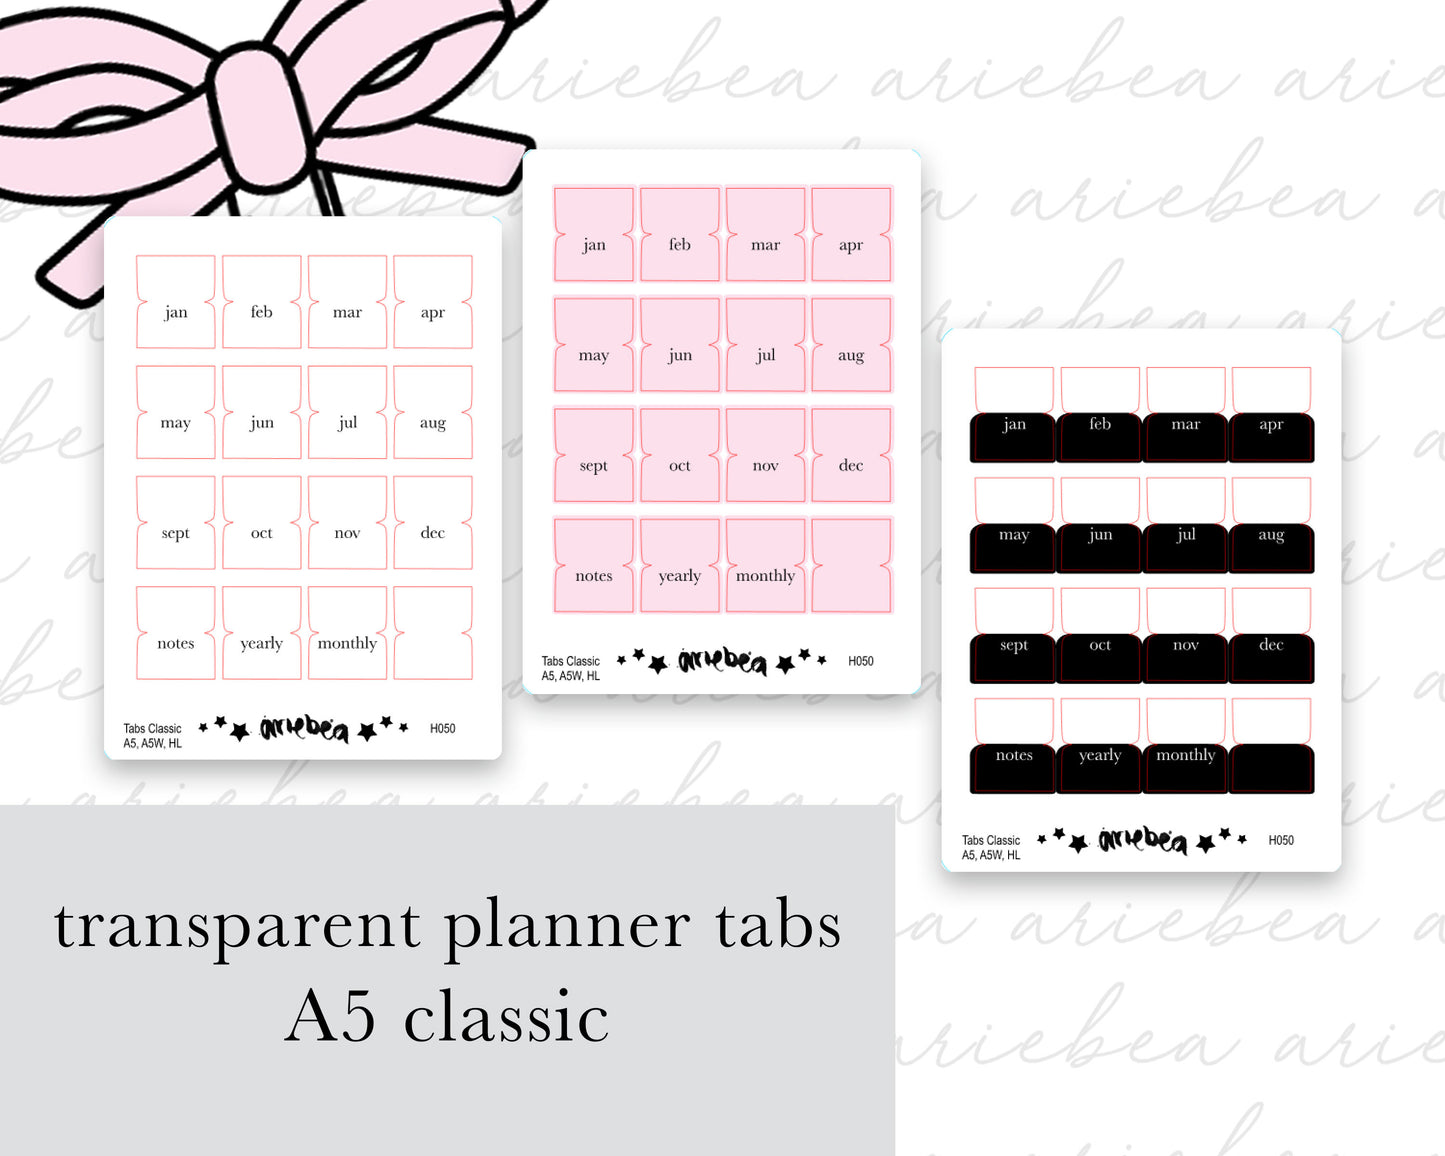 Monthly Tabs Transparent Classic | A5, A5Wide, A5, Half Letter